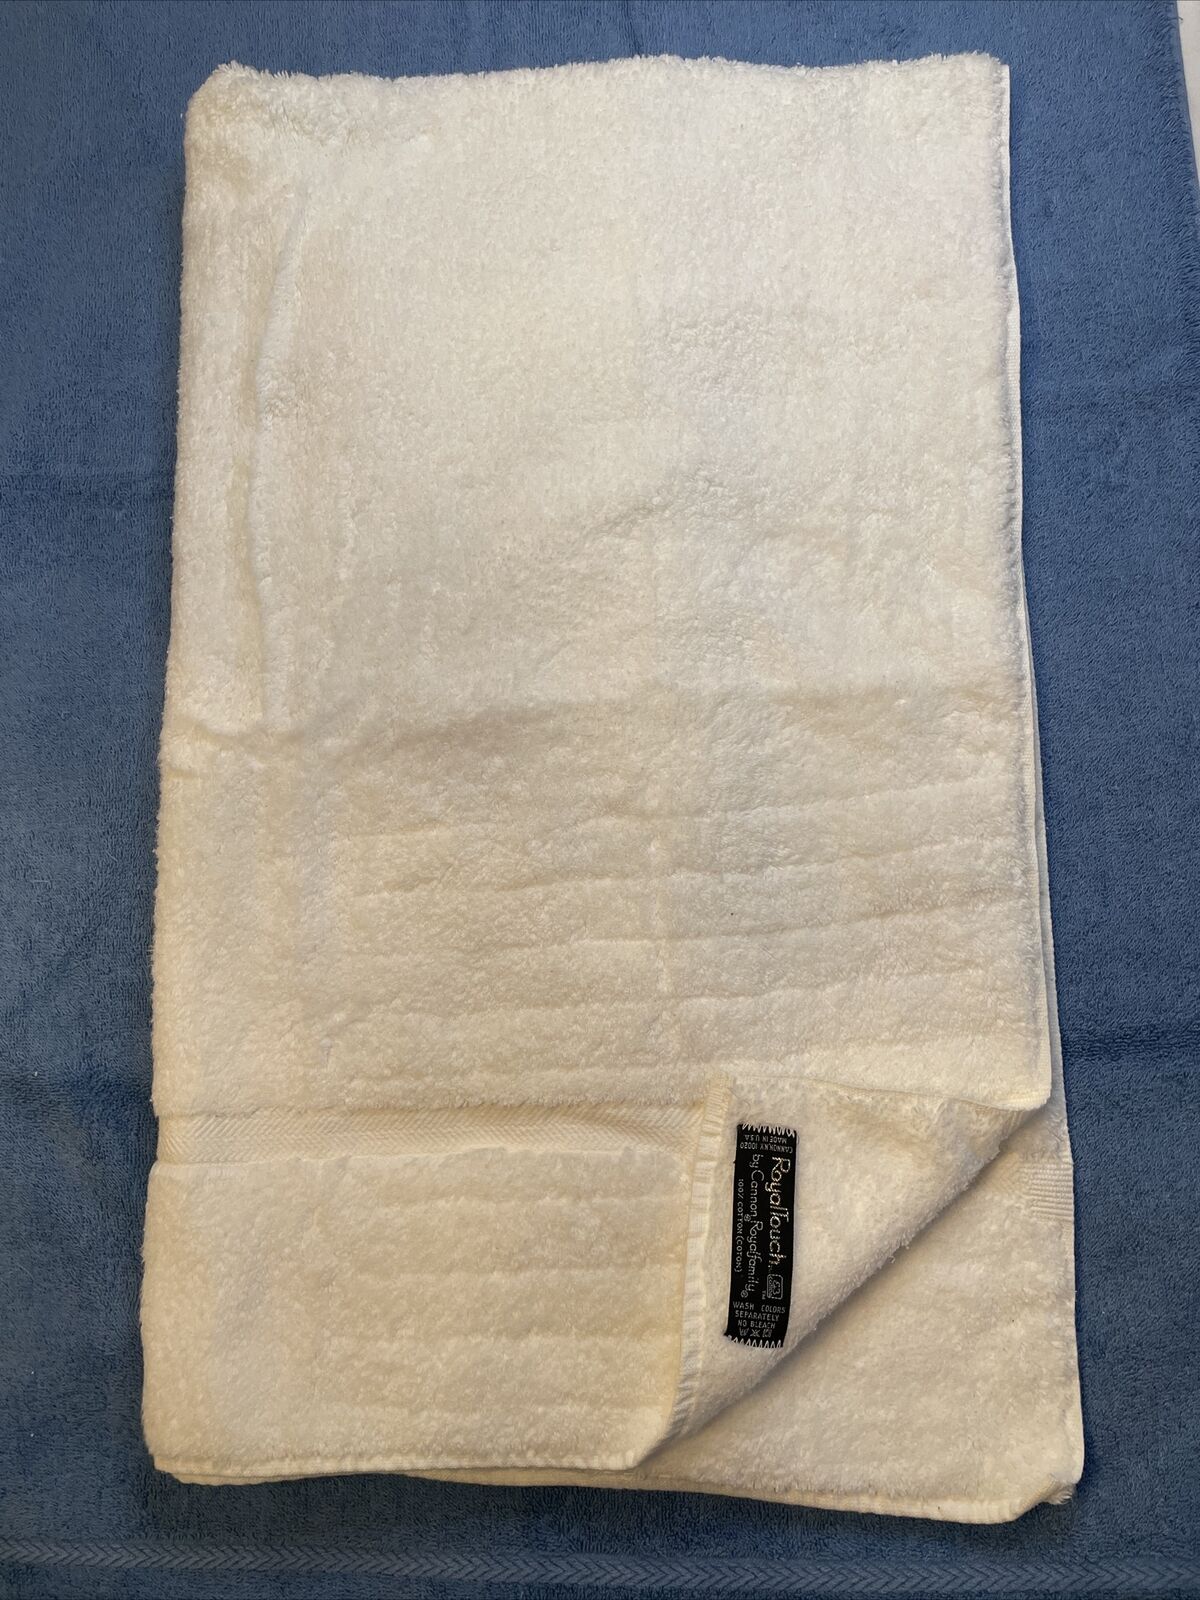 New Vtg Royal Touch Cannon Royal Family White Bath Towel Extra Soft USA Cotton